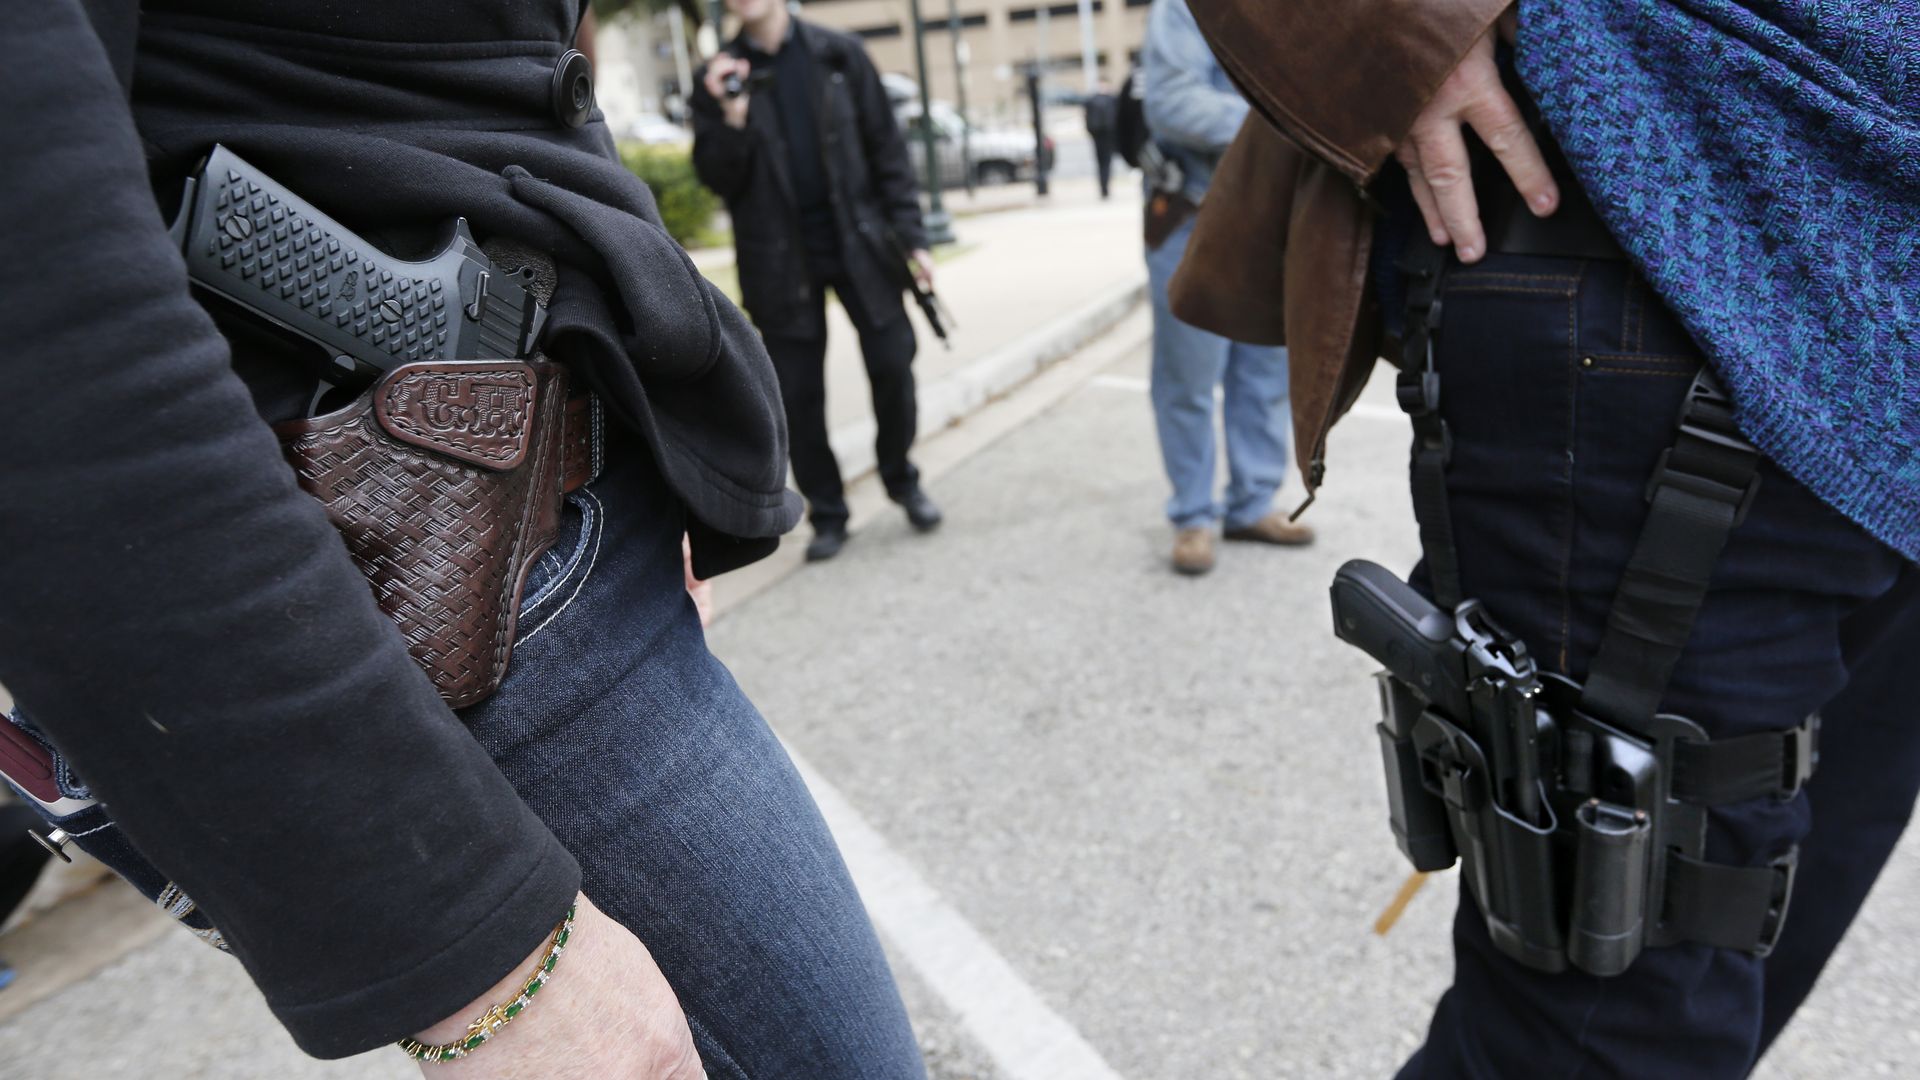 Handgun holsters during an open carry rally in Austin, Texas in 2016